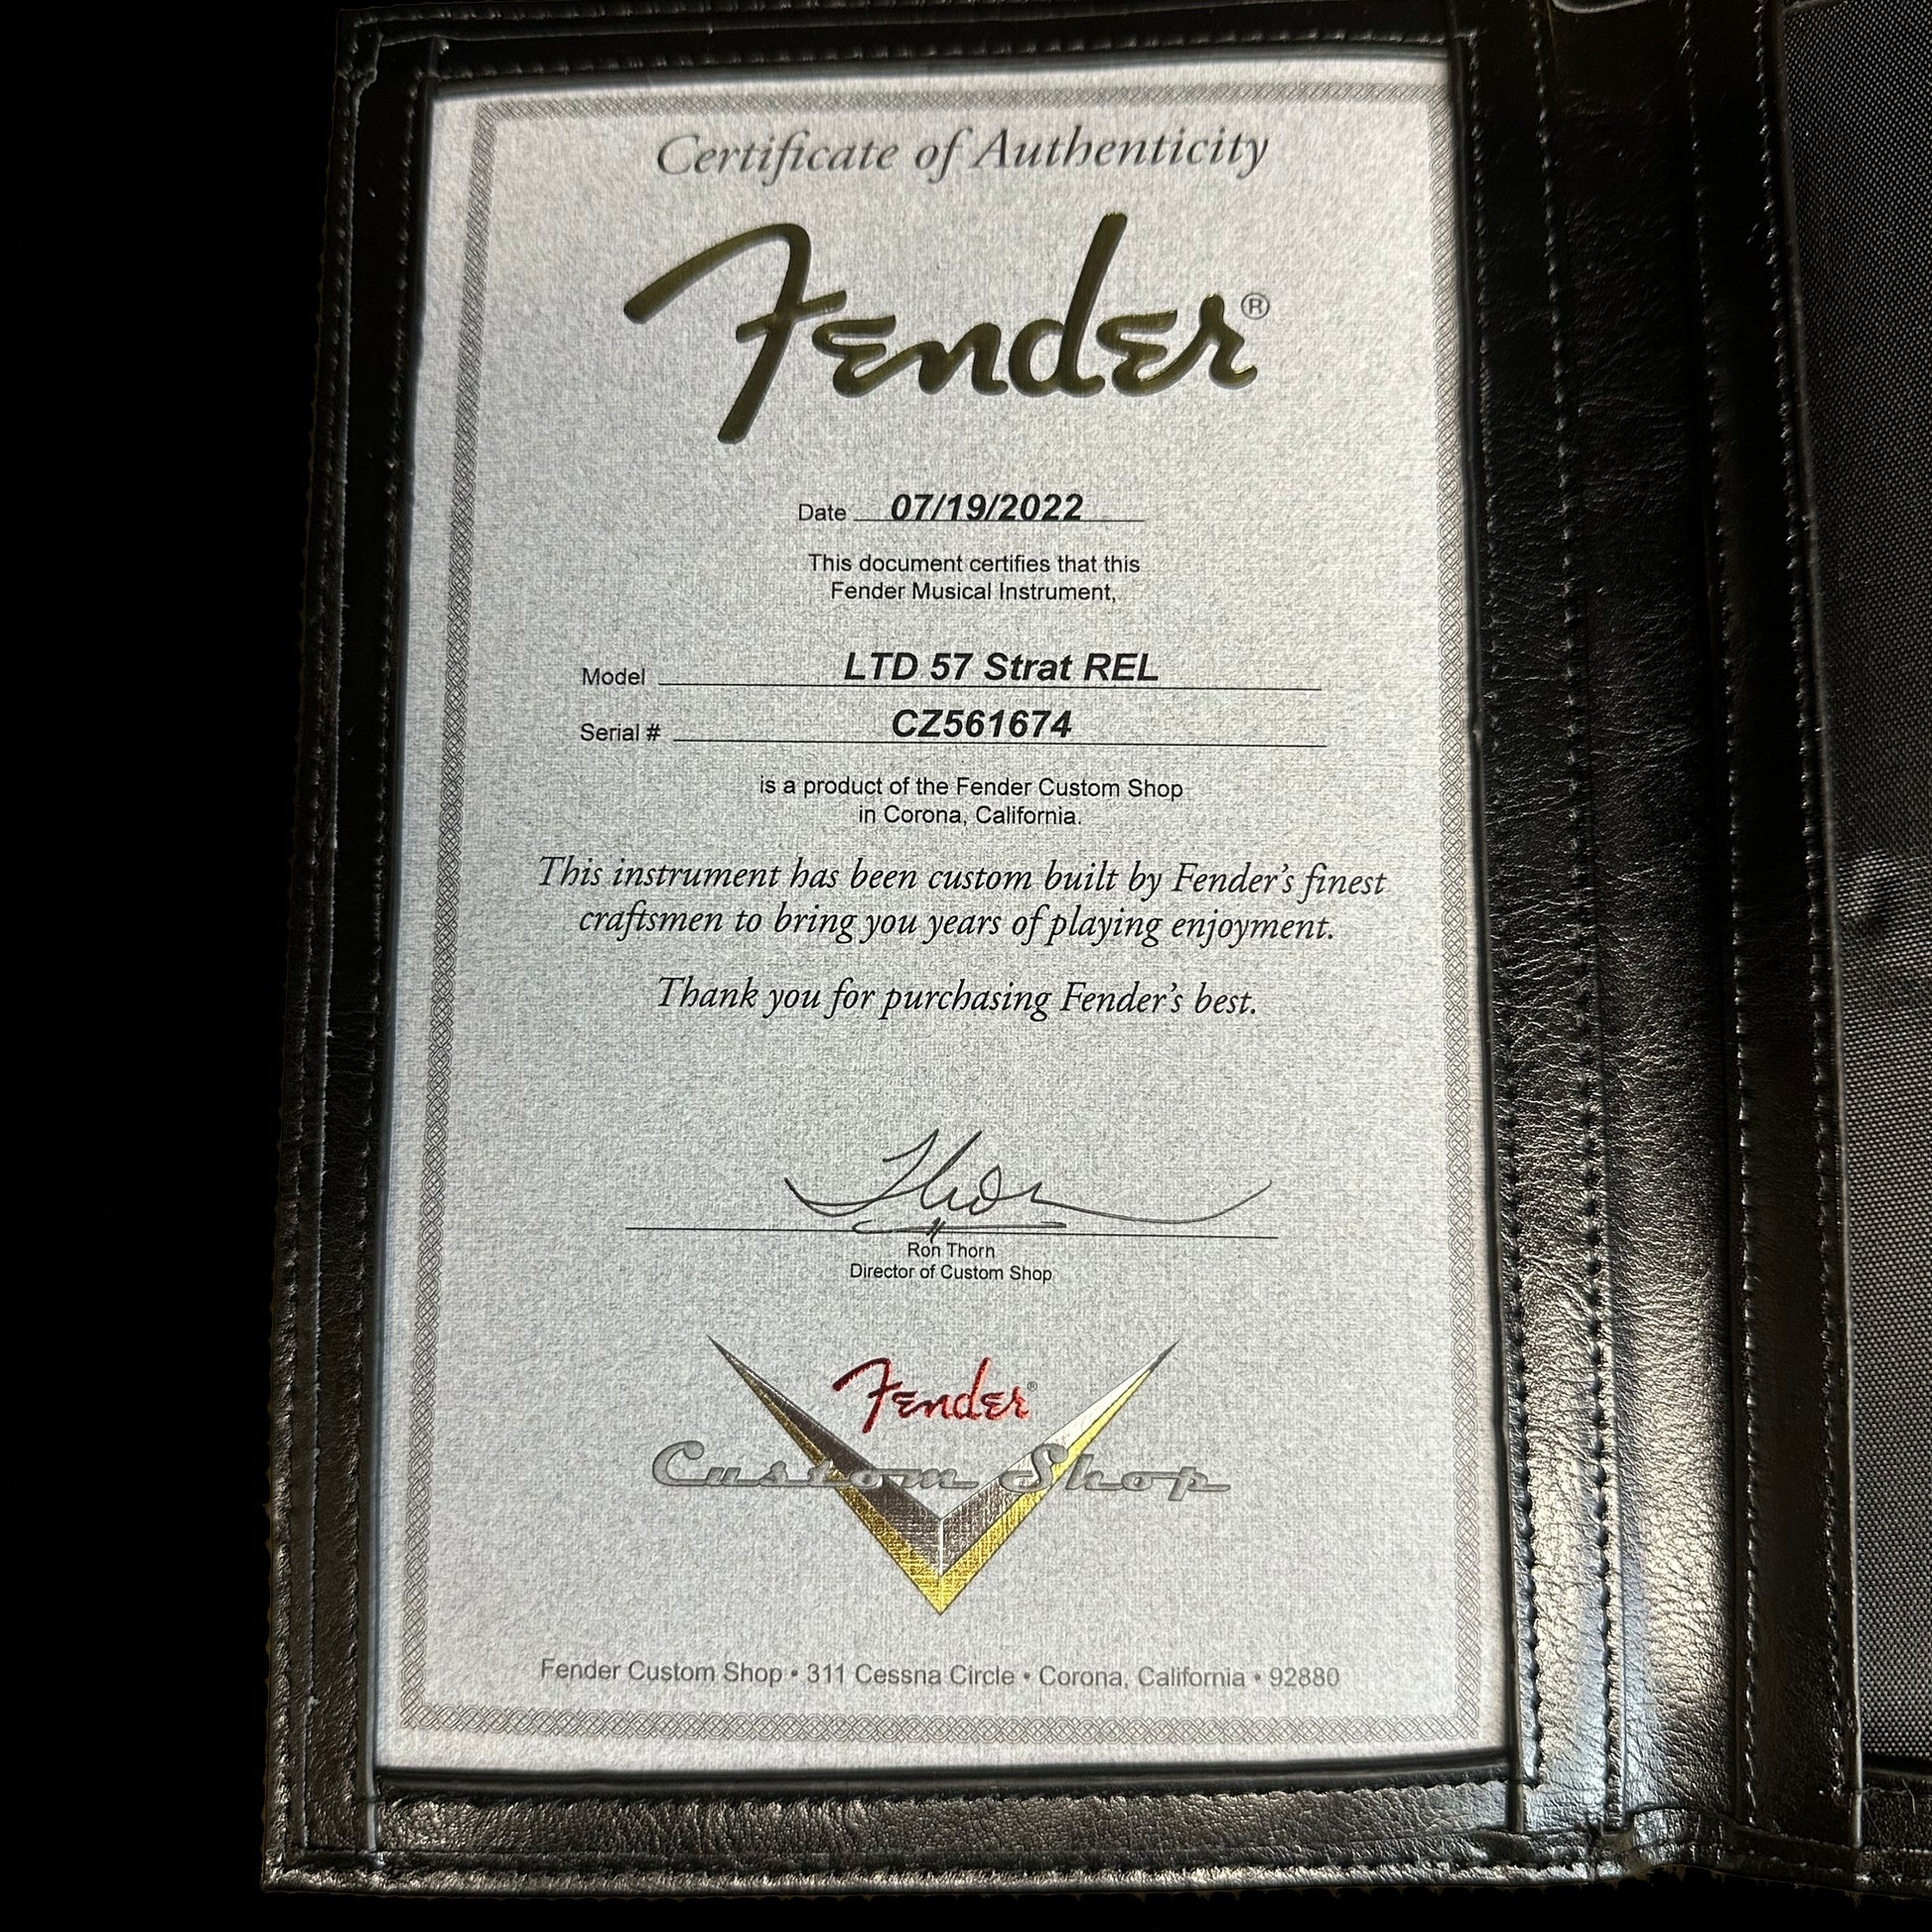 Certificate of Authenticity for Fender Custom Shop Limited Edition '57 Stratocaster Relic Wide Fade 2 Color Sunburst.